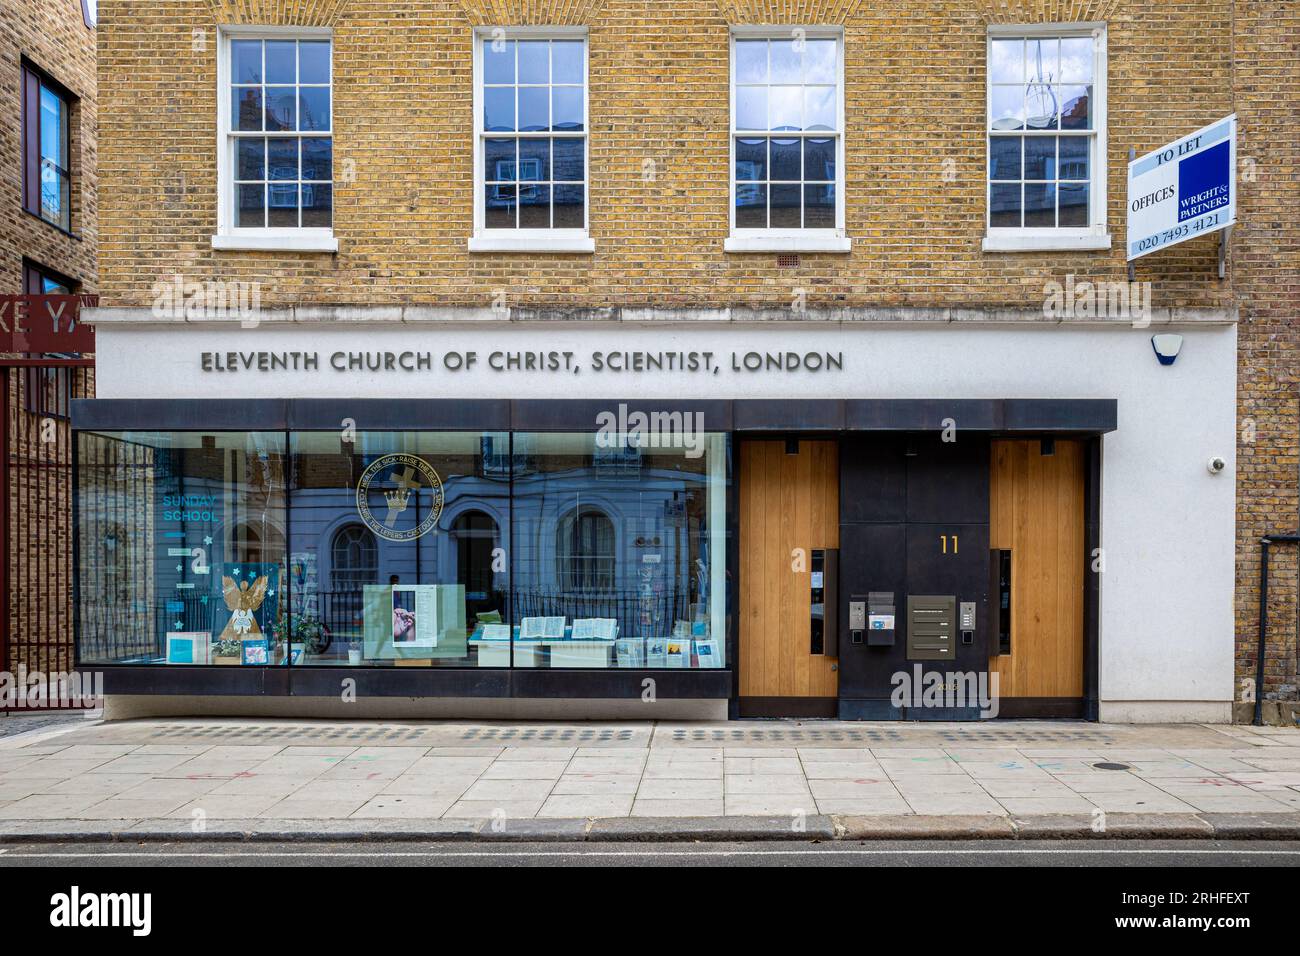 Eleventh Church of Christ Scientist London. Eleventh Church, London was formed in 1922. Located at 11 St. Chad’s Street, London. Stock Photo